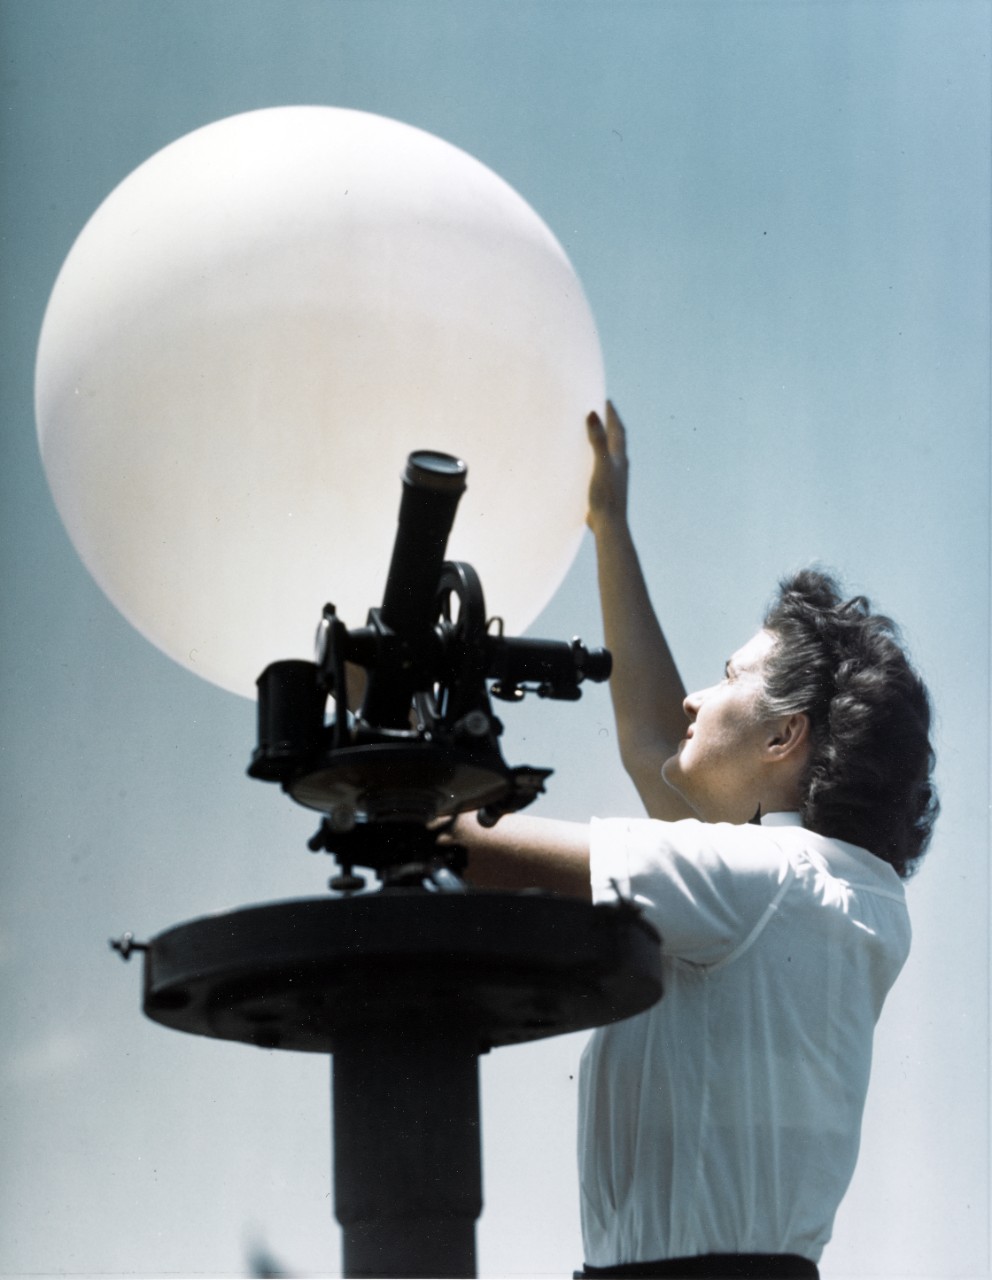 A woman holds a white weather balloon above a black platform.